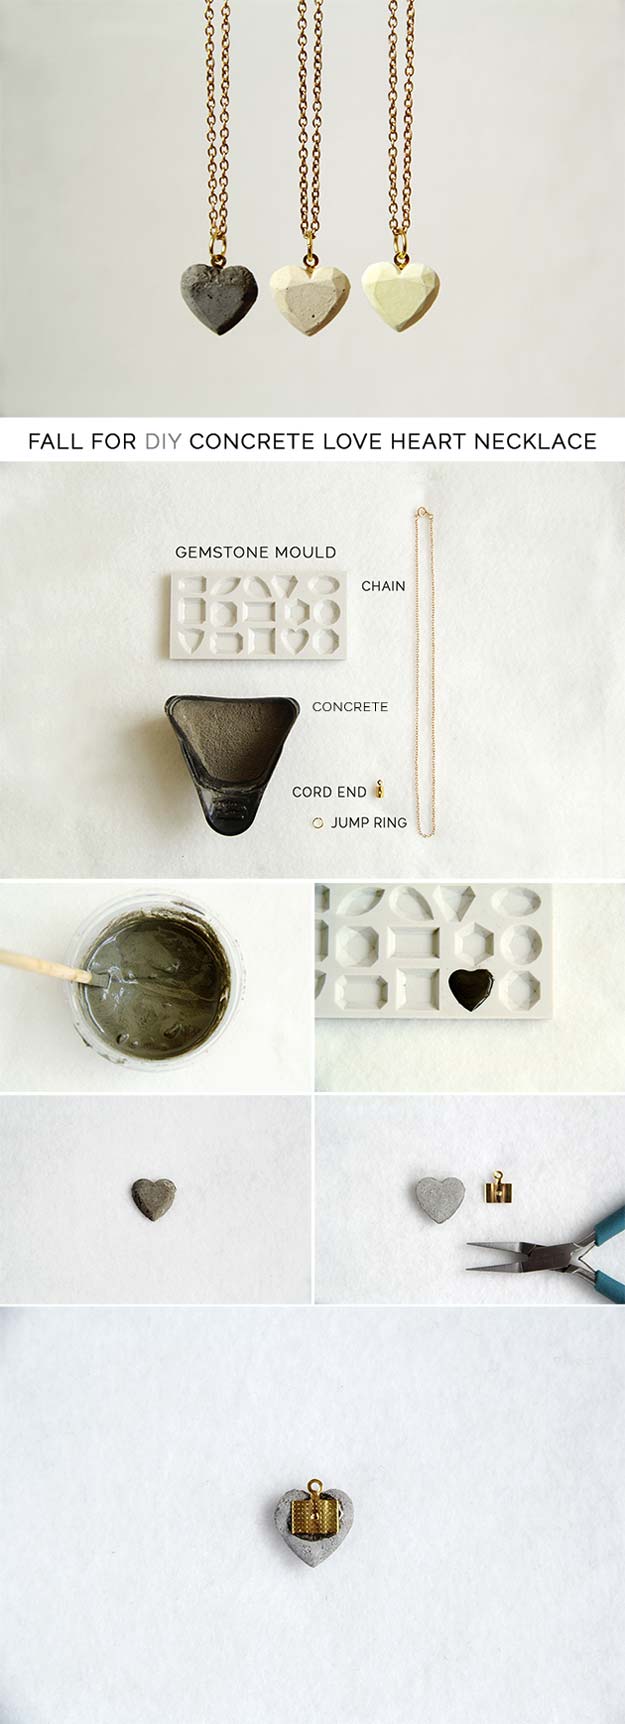 Best DIY Ideas from Tumblr - DIY Concrete Love Heart Necklace - Crafts and DIY Projects Inspired by Tumblr are Perfect Room Decor for Teens and Adults - Fun Crafts and Easy DIY Gifts, Clothes and Bedroom Project Tutorials for Teenagers and Tweens 